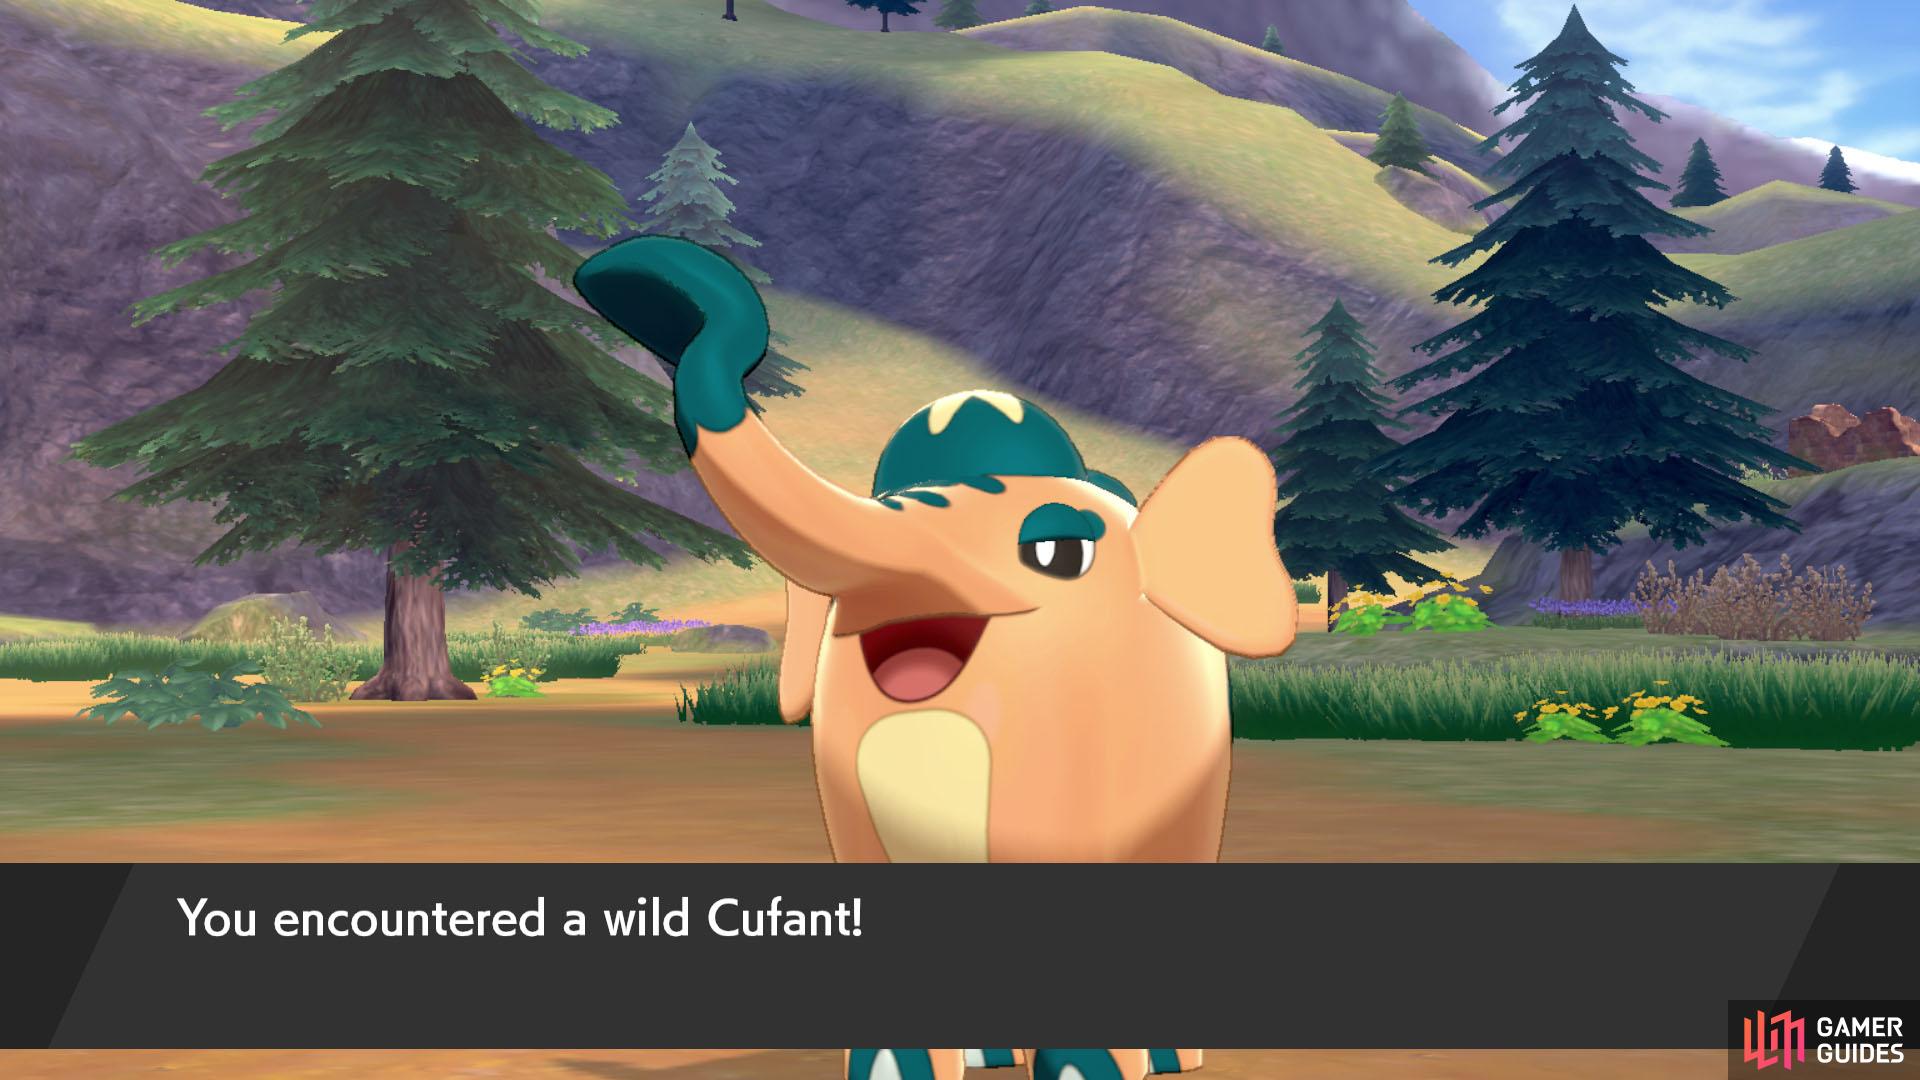 If you couldn't find Cufant in the base game, they're relatively common here.